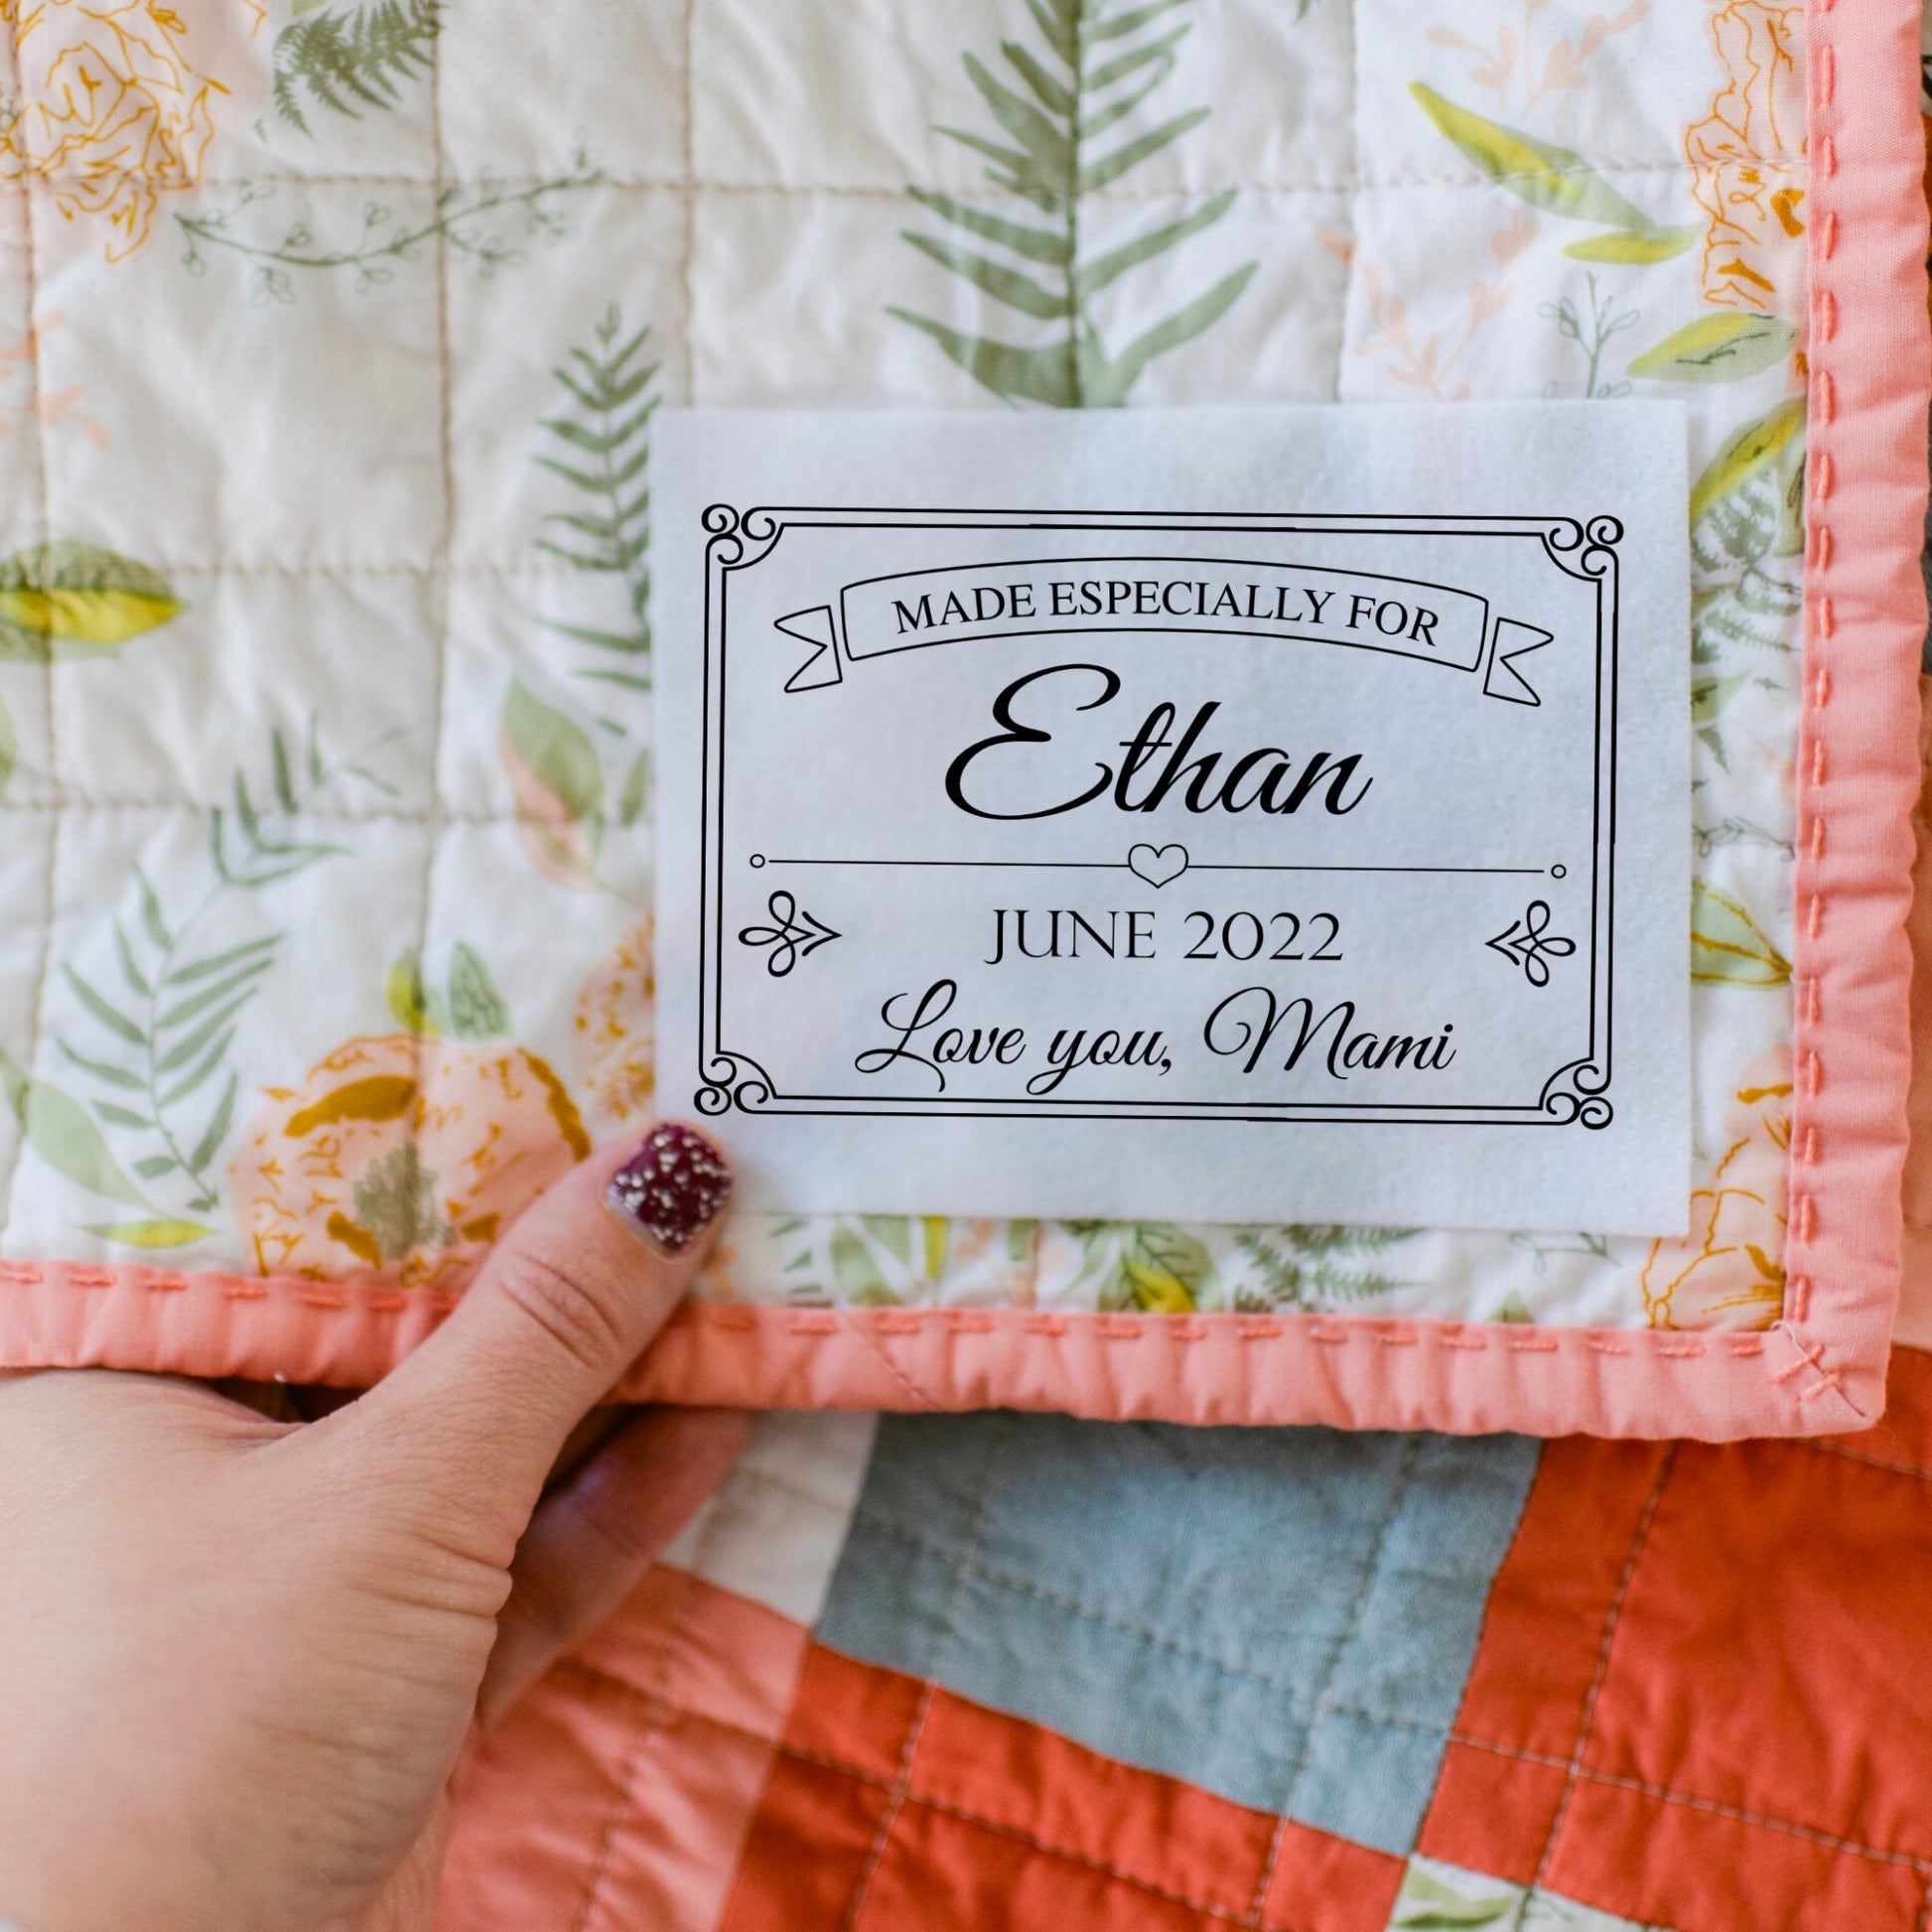 Custom quilt label for quilt gifting - Jammin Threads